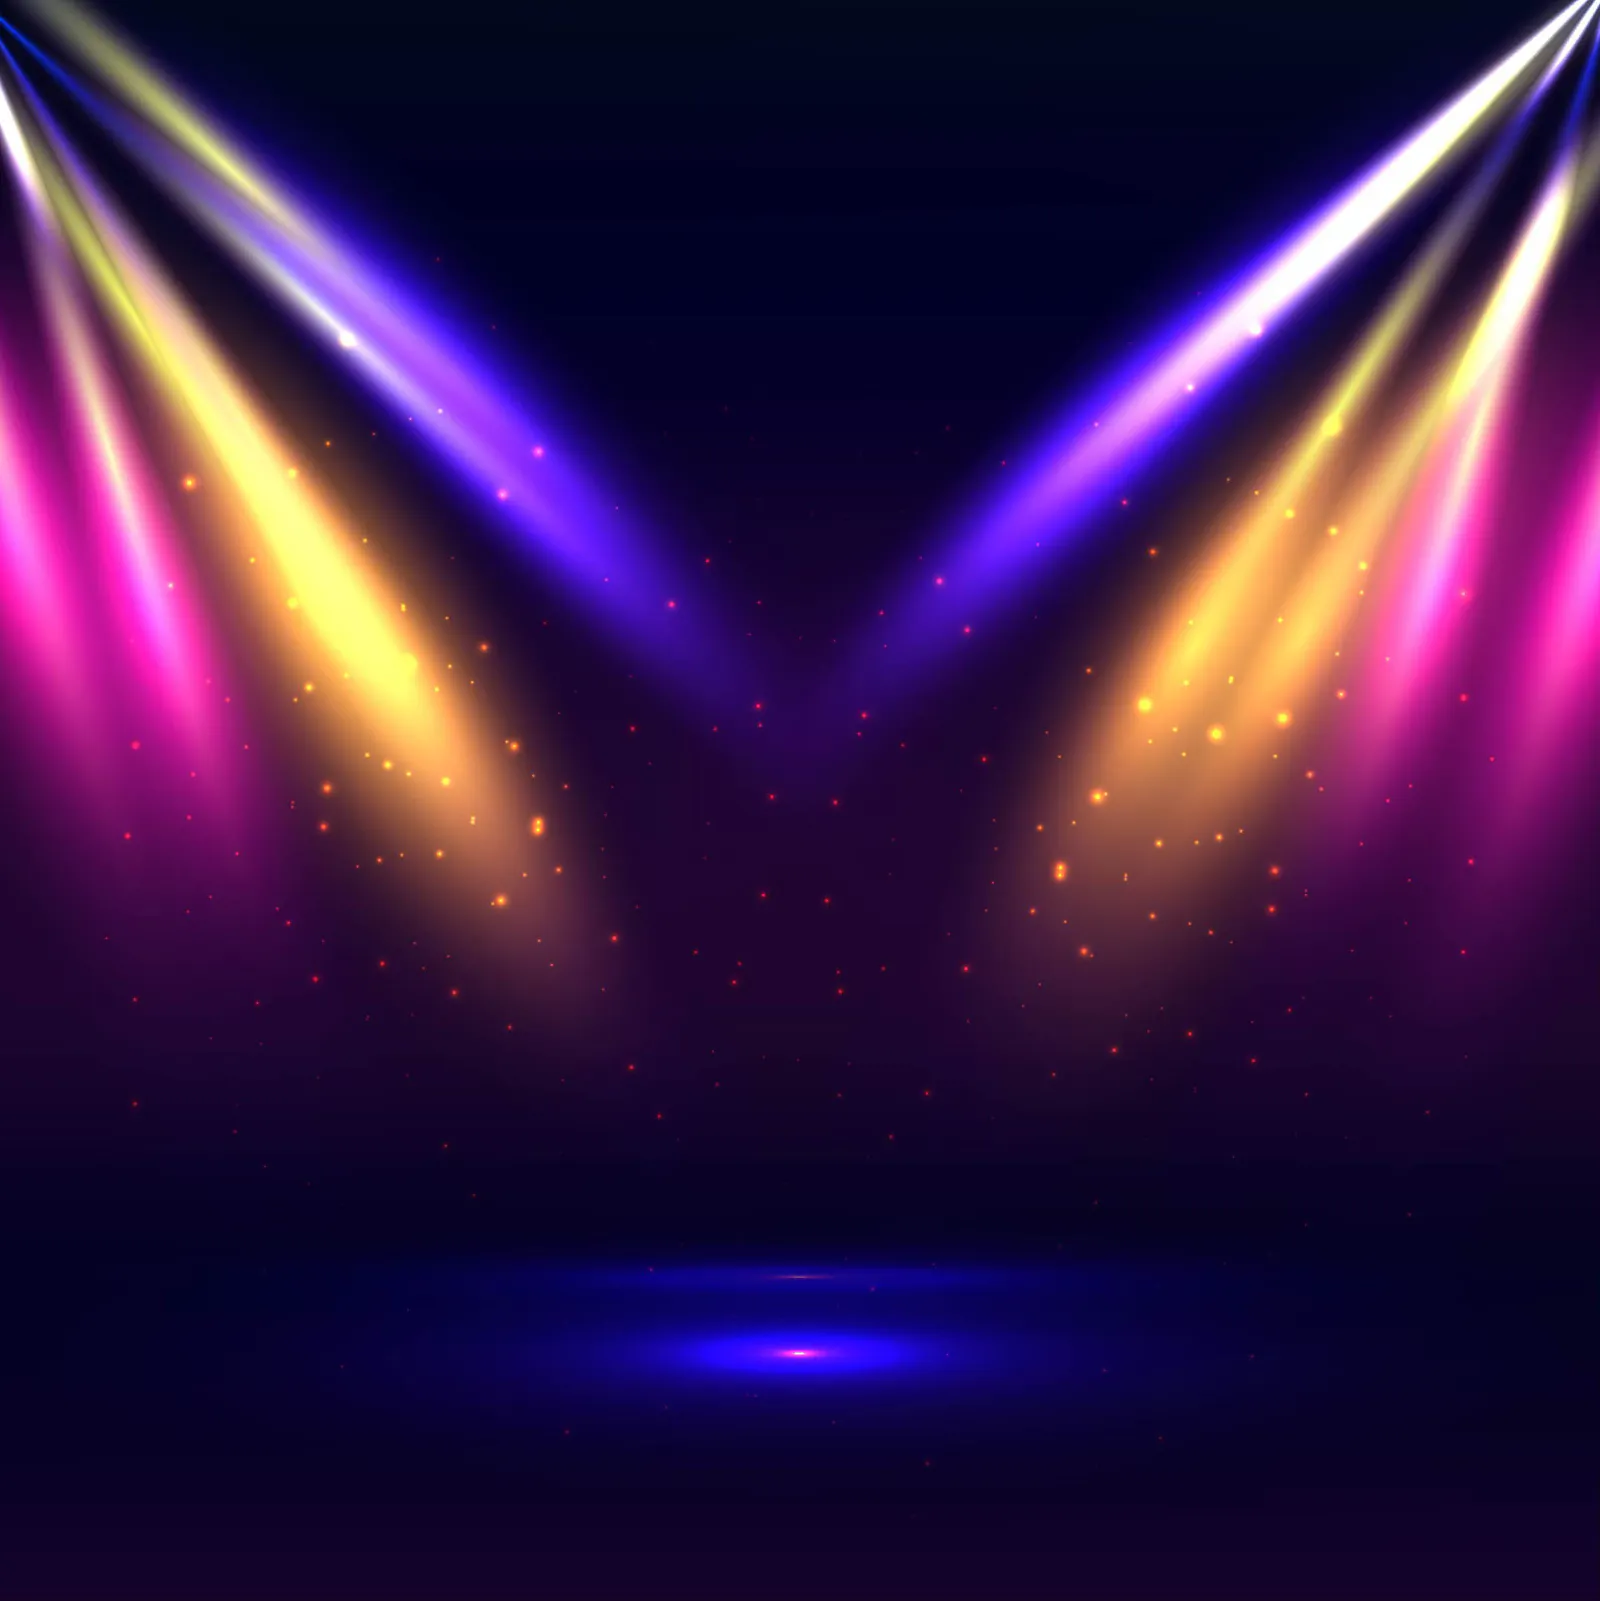 <a href="https://www.freepik.com/free-vector/colorful-stage-lights-background_1173445.htm#query=eurovision&position=4&from_view=search&track=sph">Image by Harryarts</a> on Freepik